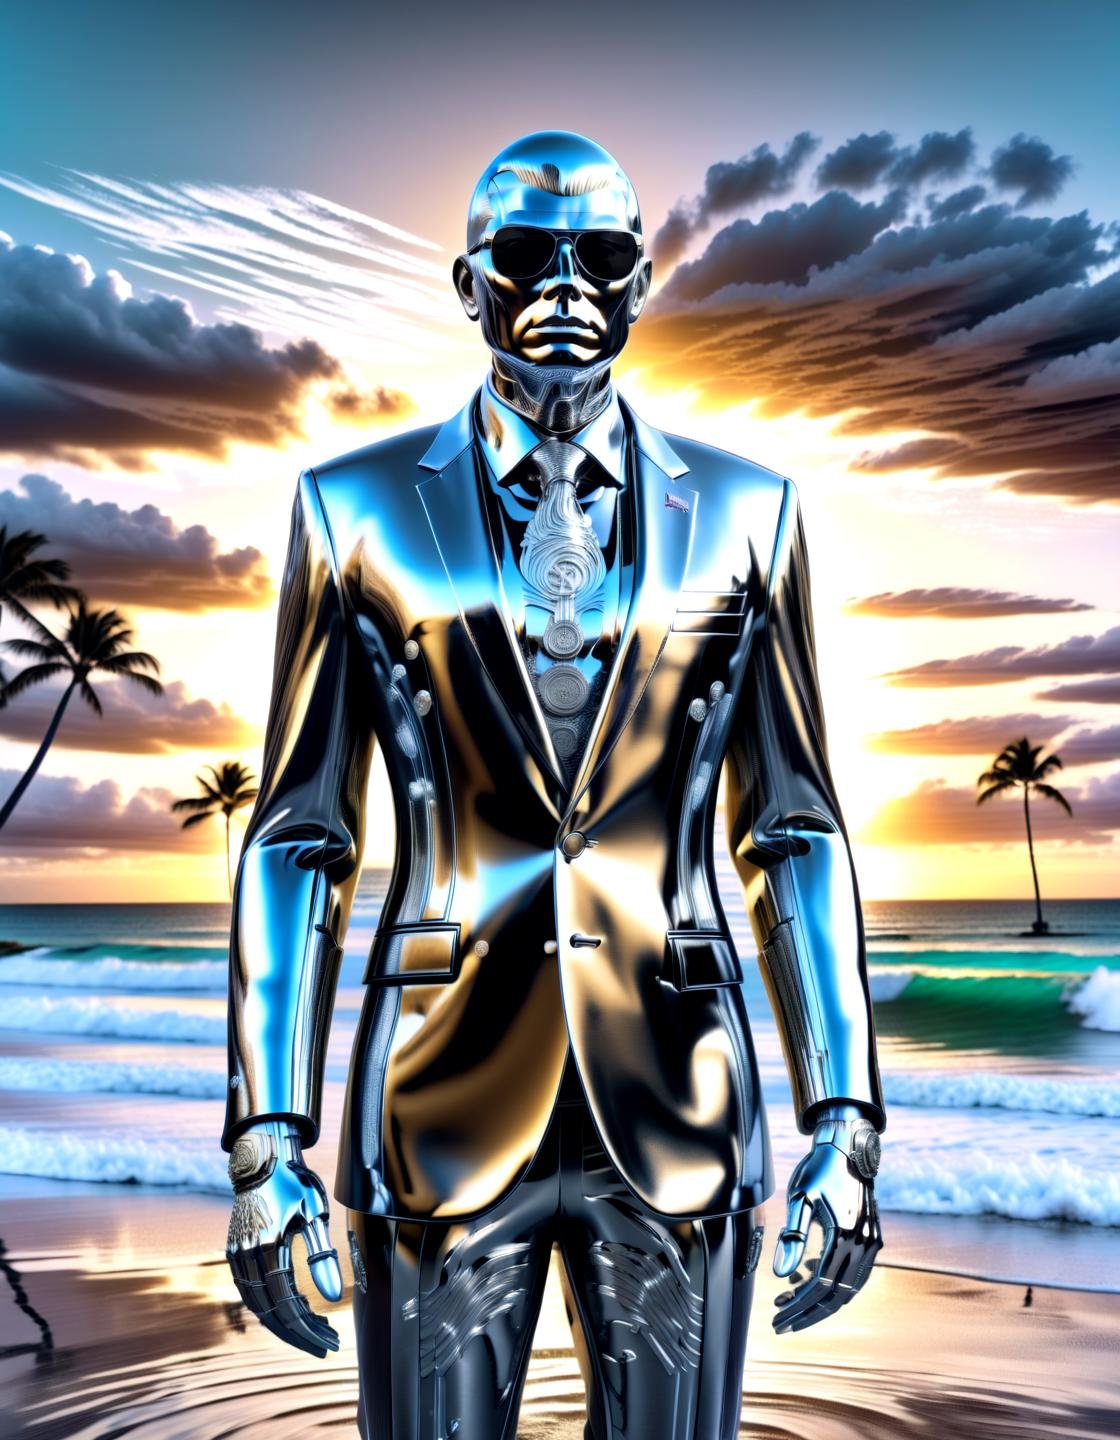 biomechanical cyberpunk donald trump, chrome skin, wearing a suit made of polyester, candy cotton clouds,robot face, mechanical parts, at a beach,mar a lago, palm tree, waves, water, watersplash, sunglass, nuclear waste, acid, toxic, toxic barrels, cyberpunk, neon lights, polished metal, cable,, . cybernetics, human-machine fusion, dystopian, organic meets artificial, dark, intricate, highly detailed